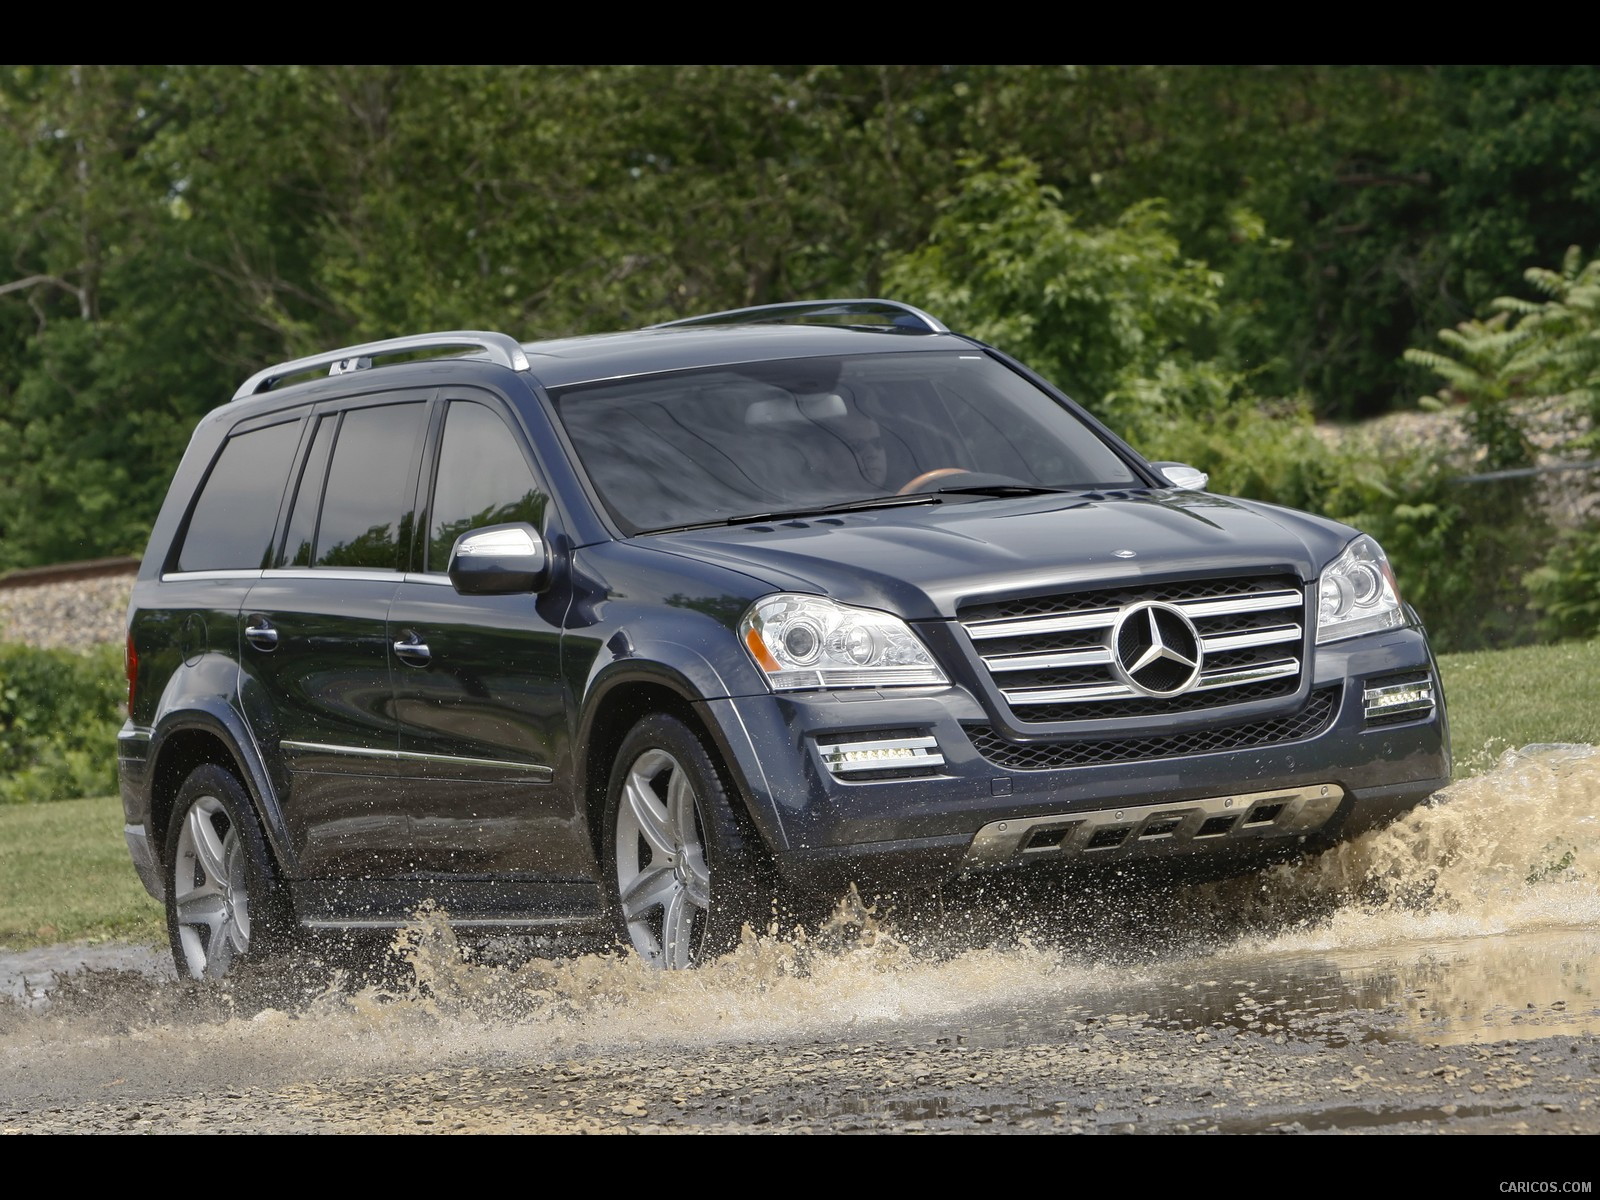 2010 Mercedes-Benz GL550 - Front, #60 of 112